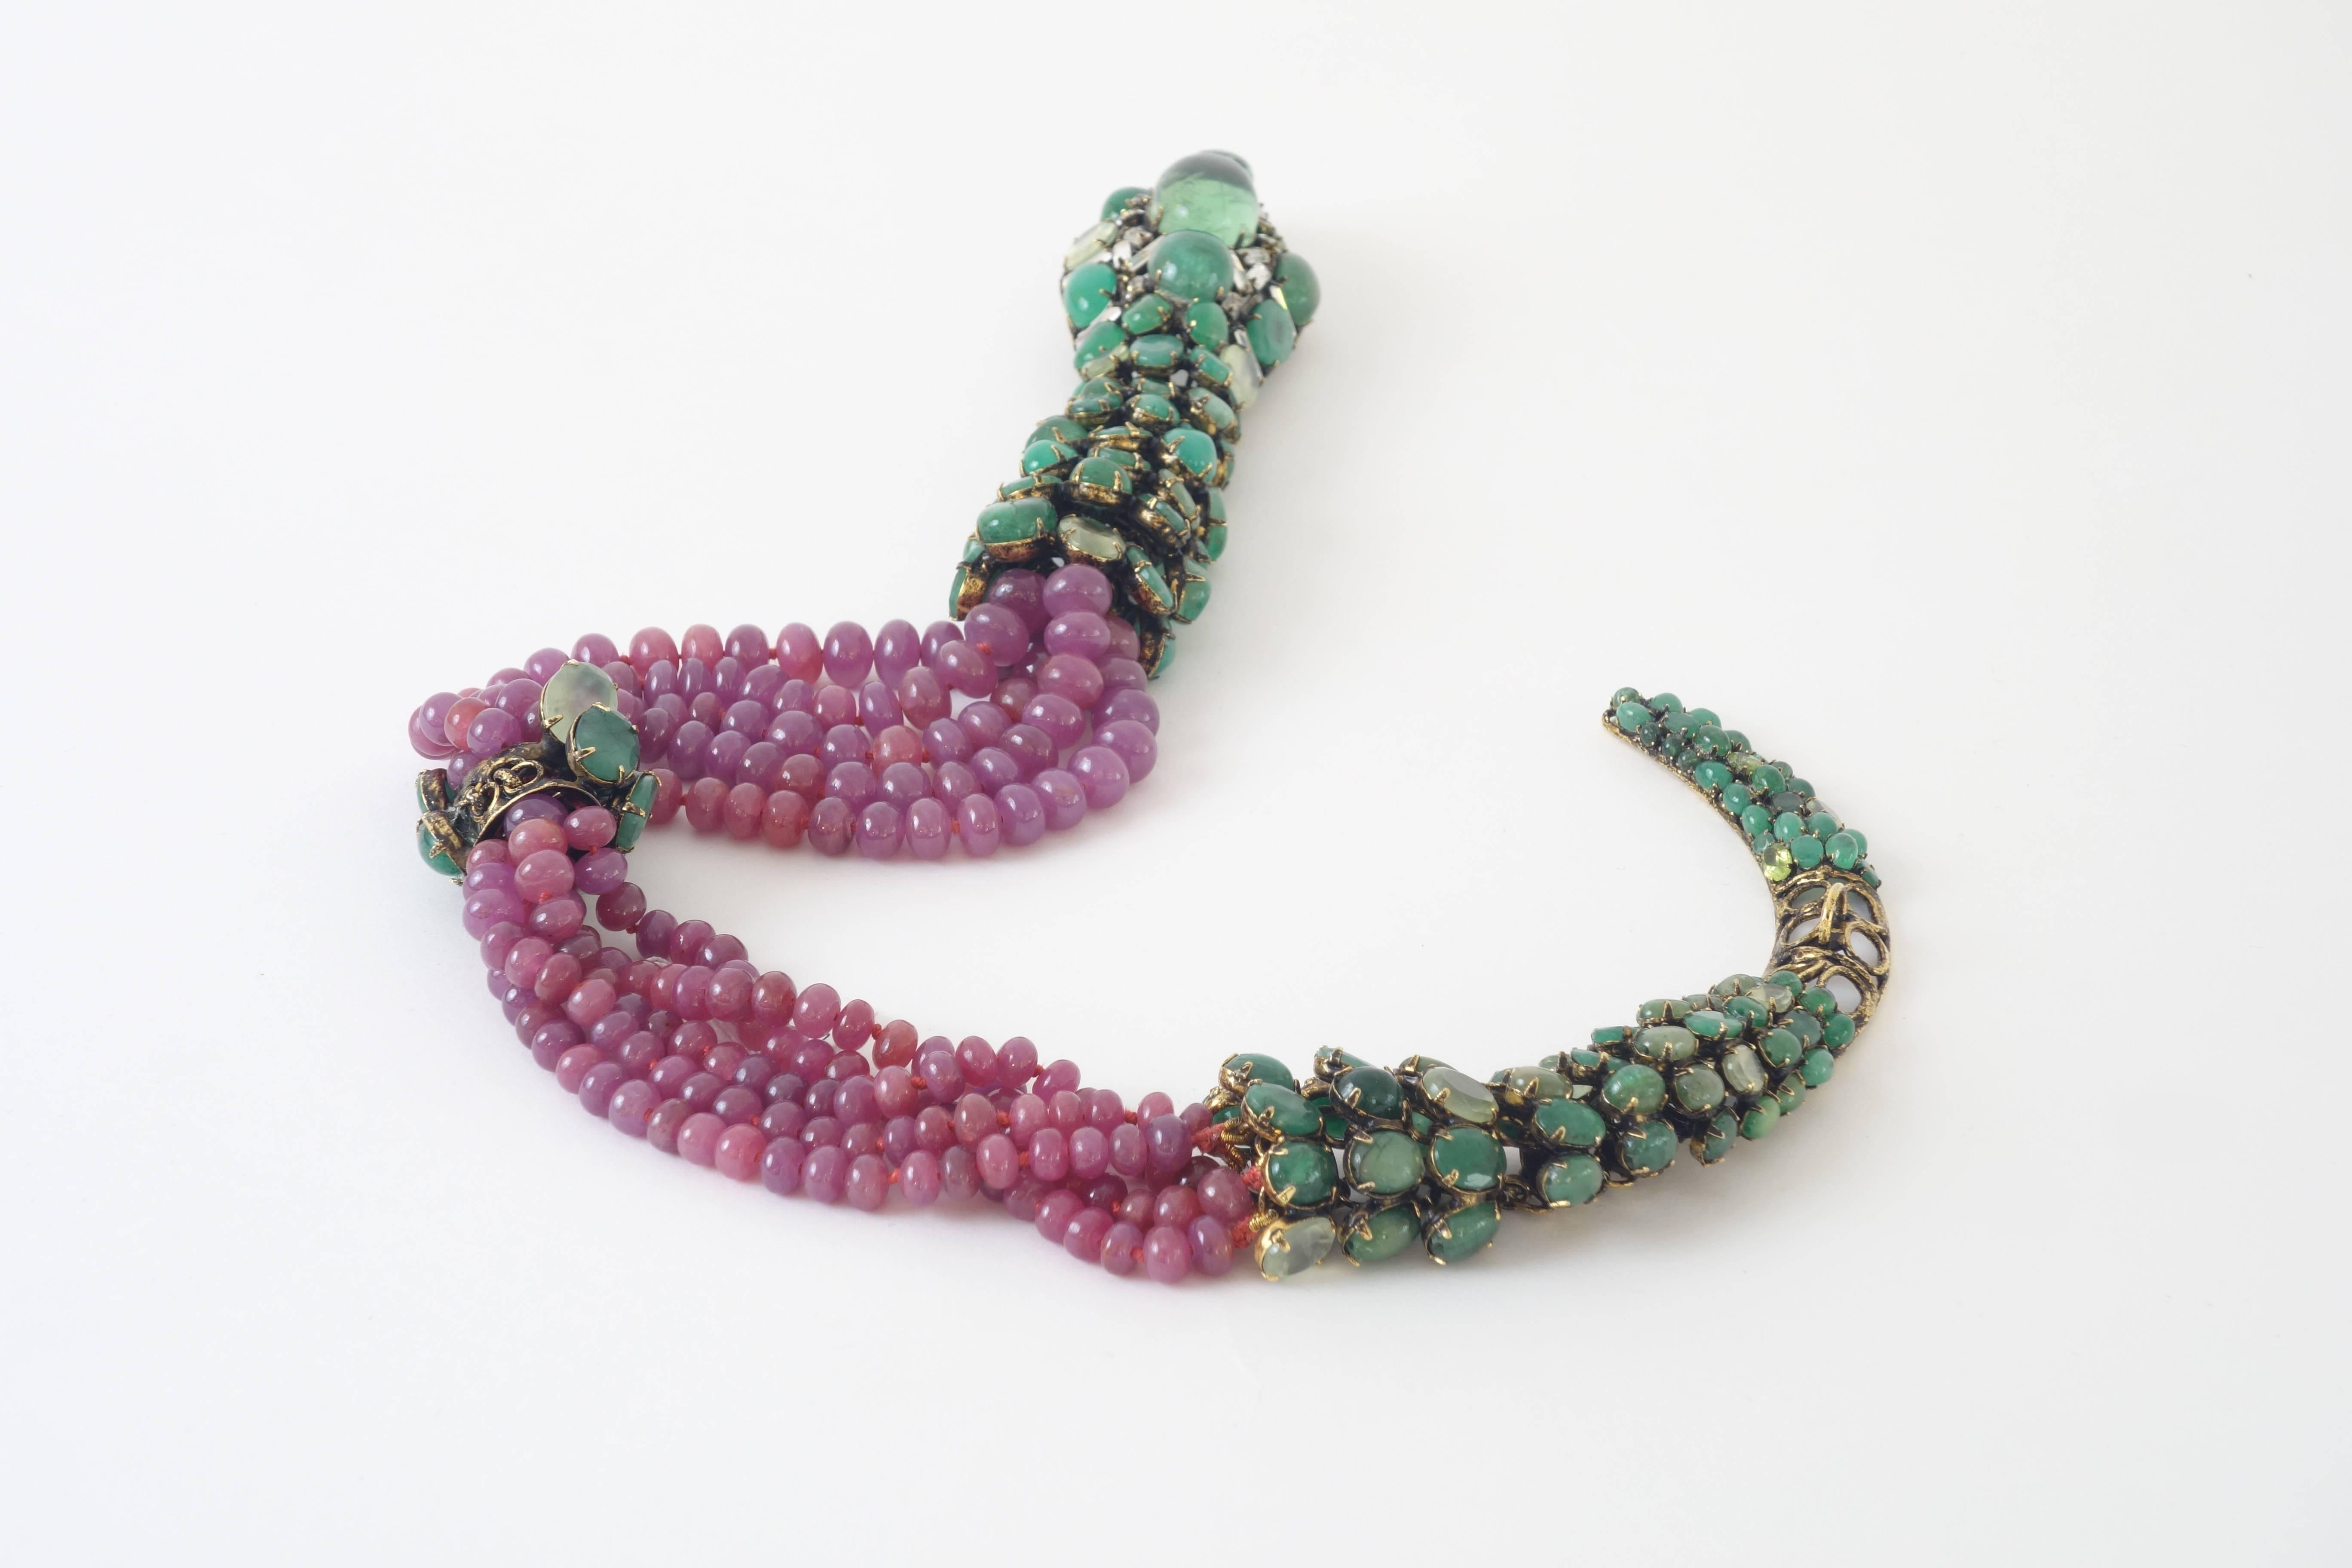 Modern Necklace by Iradj Moini, with a Blend of Emerald, Ruby and Swarovski Crystal